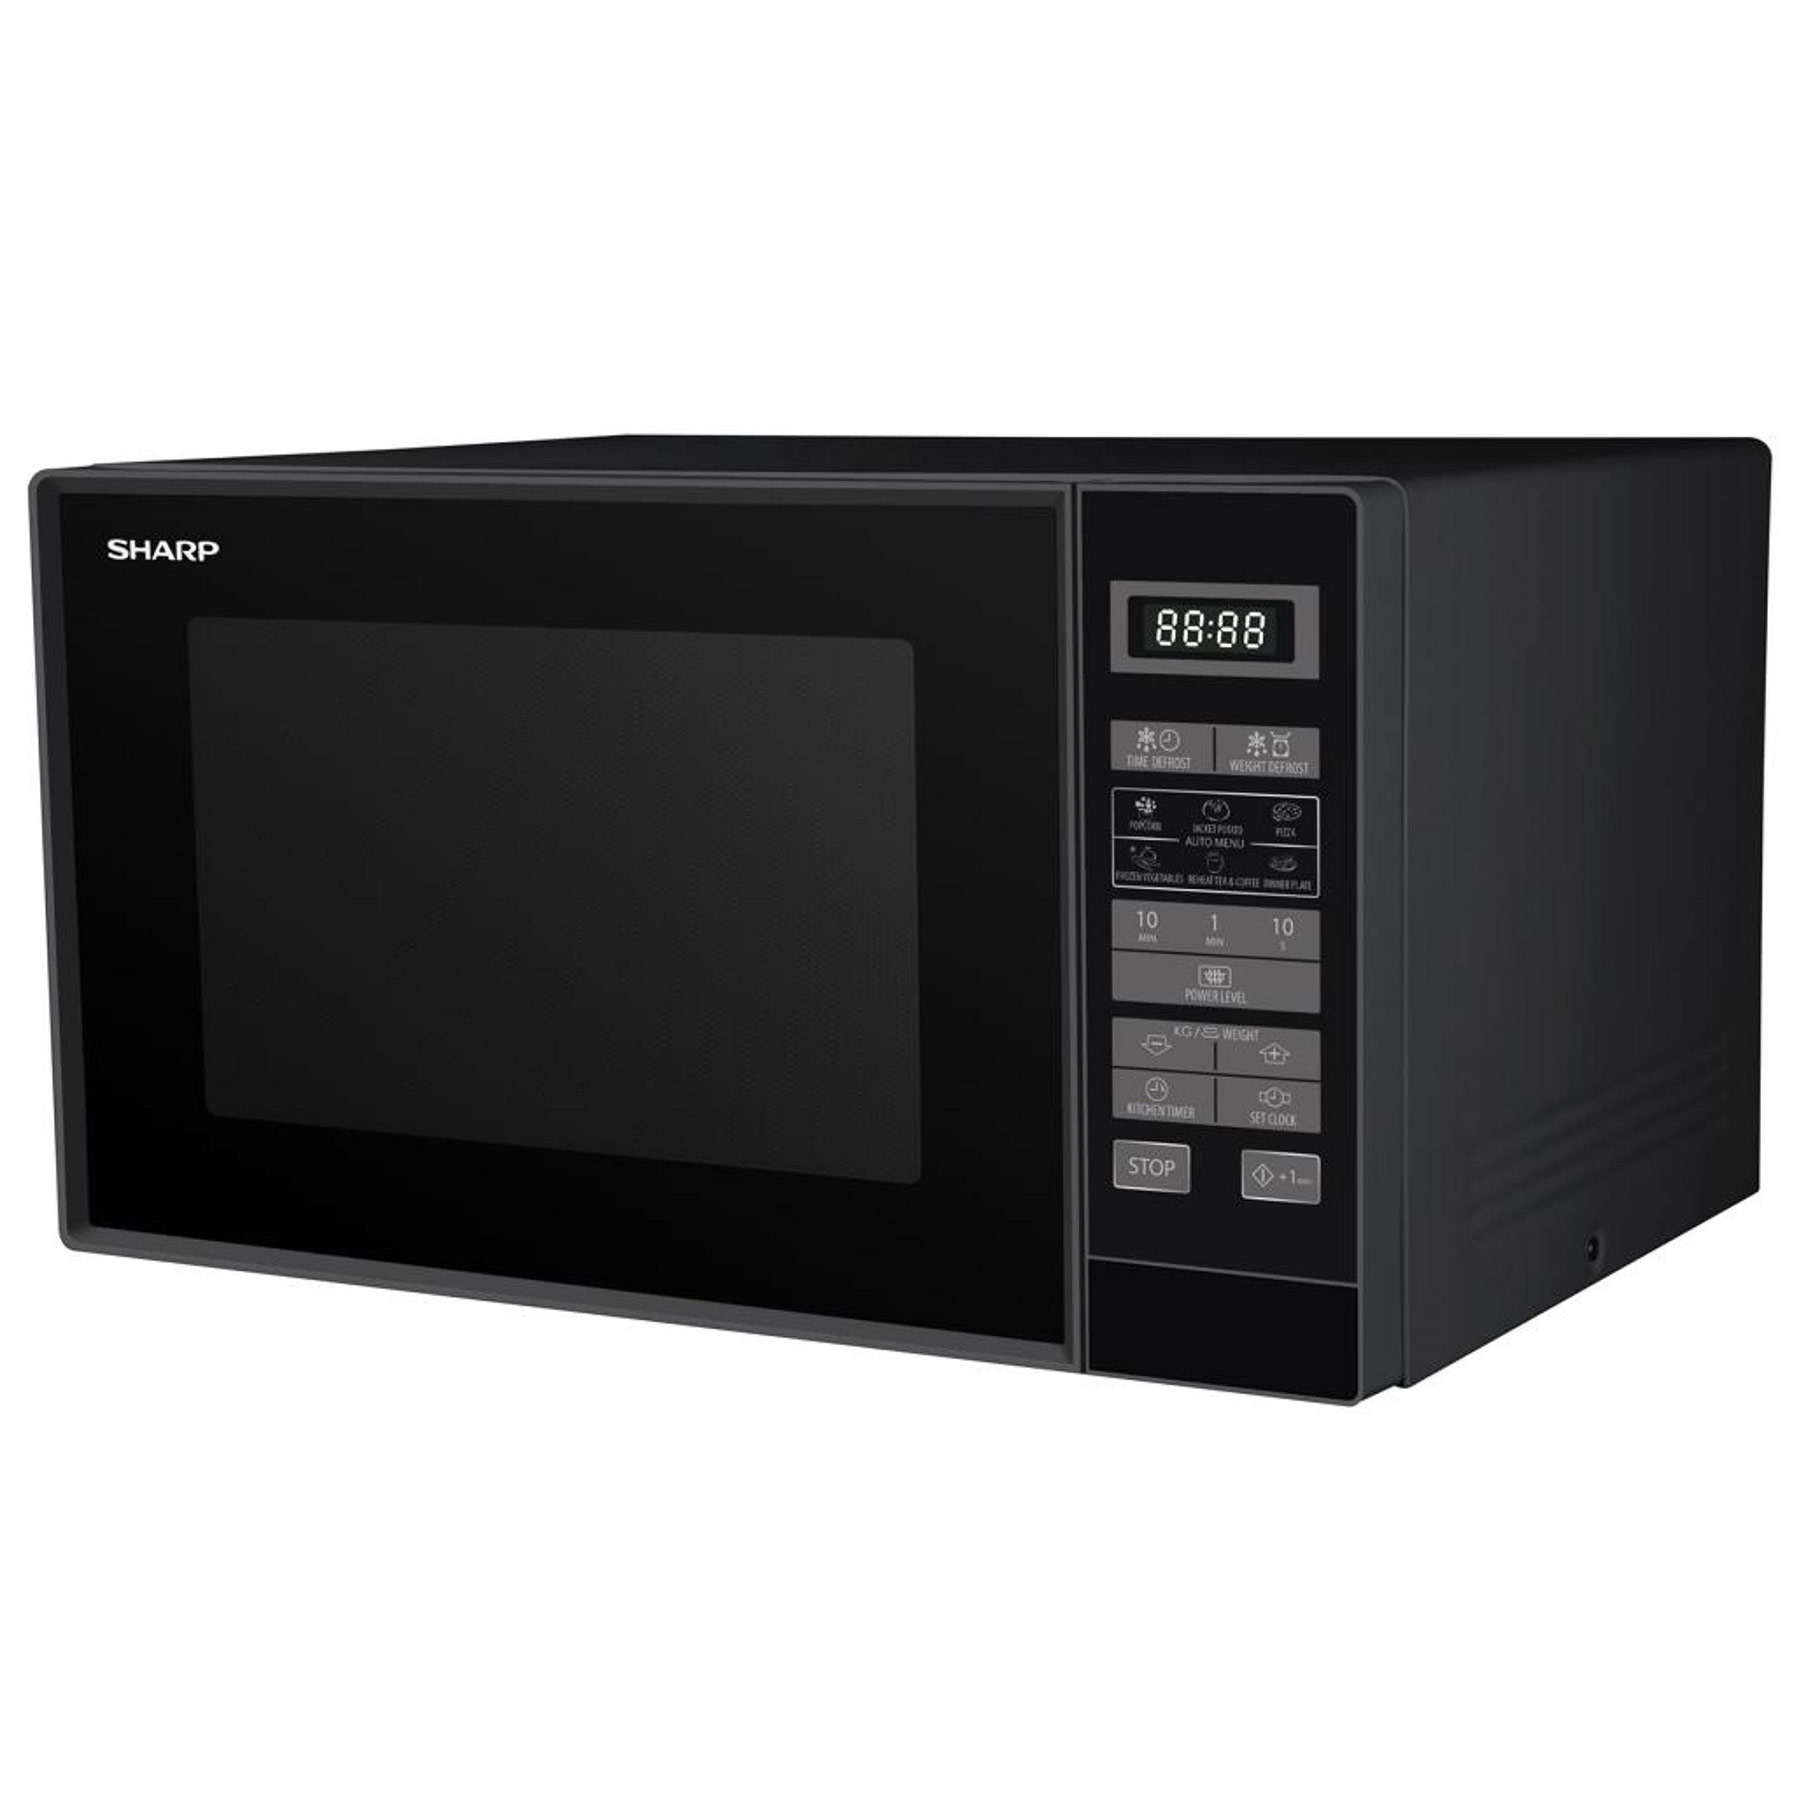 Sharp RD202TB UK Microwave Oven in Black 25L 800W